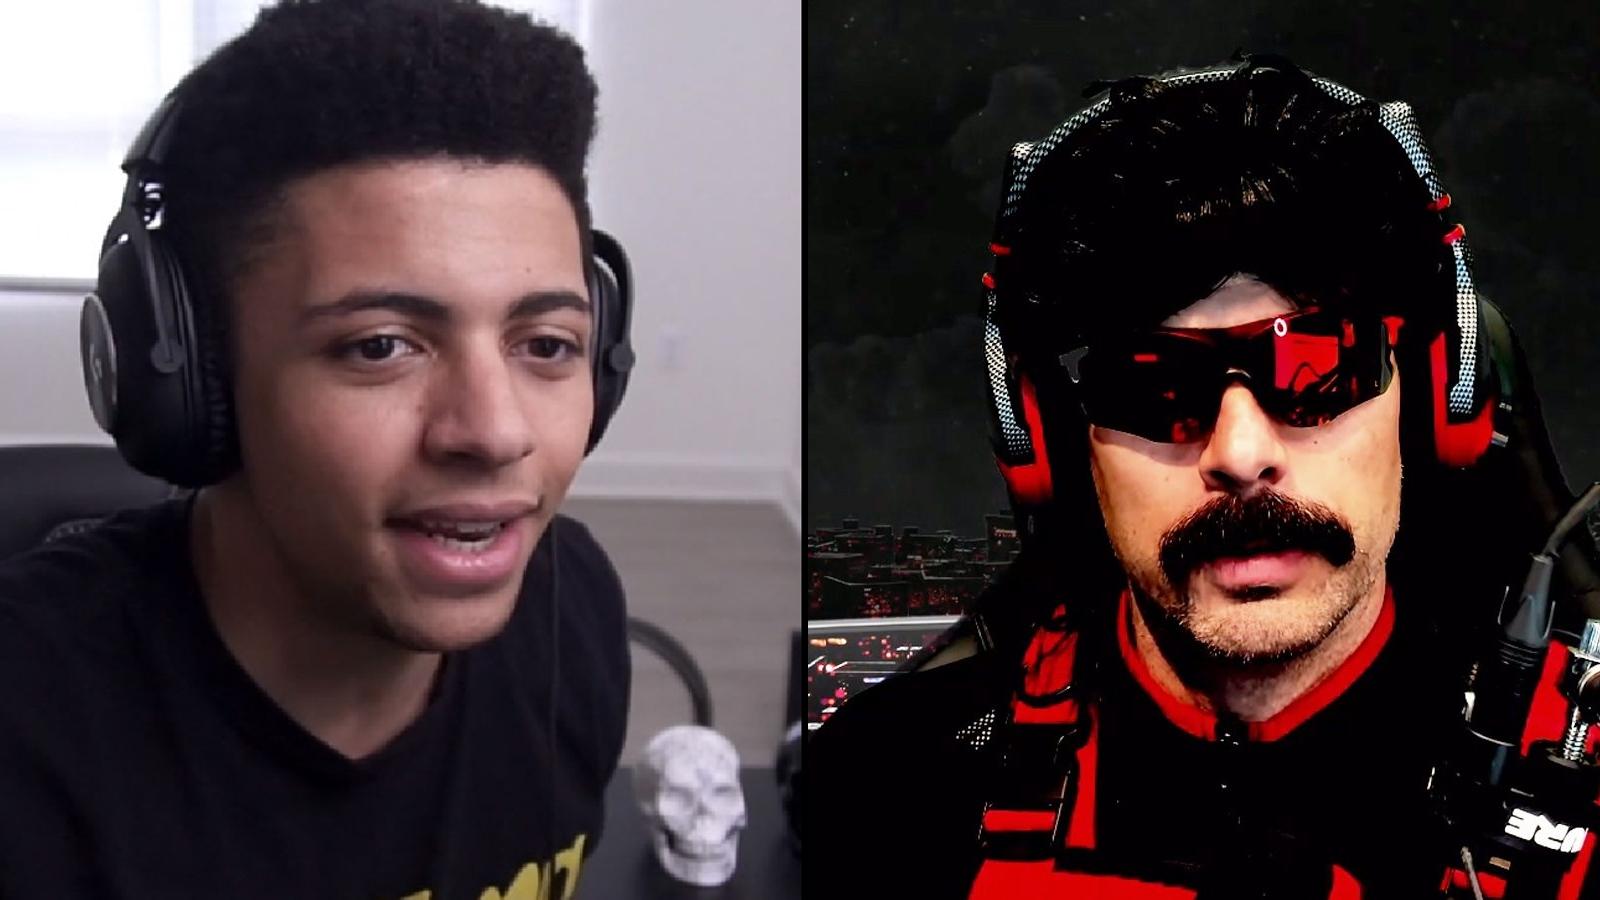 Myth and Dr Disrespect side by side streaming images